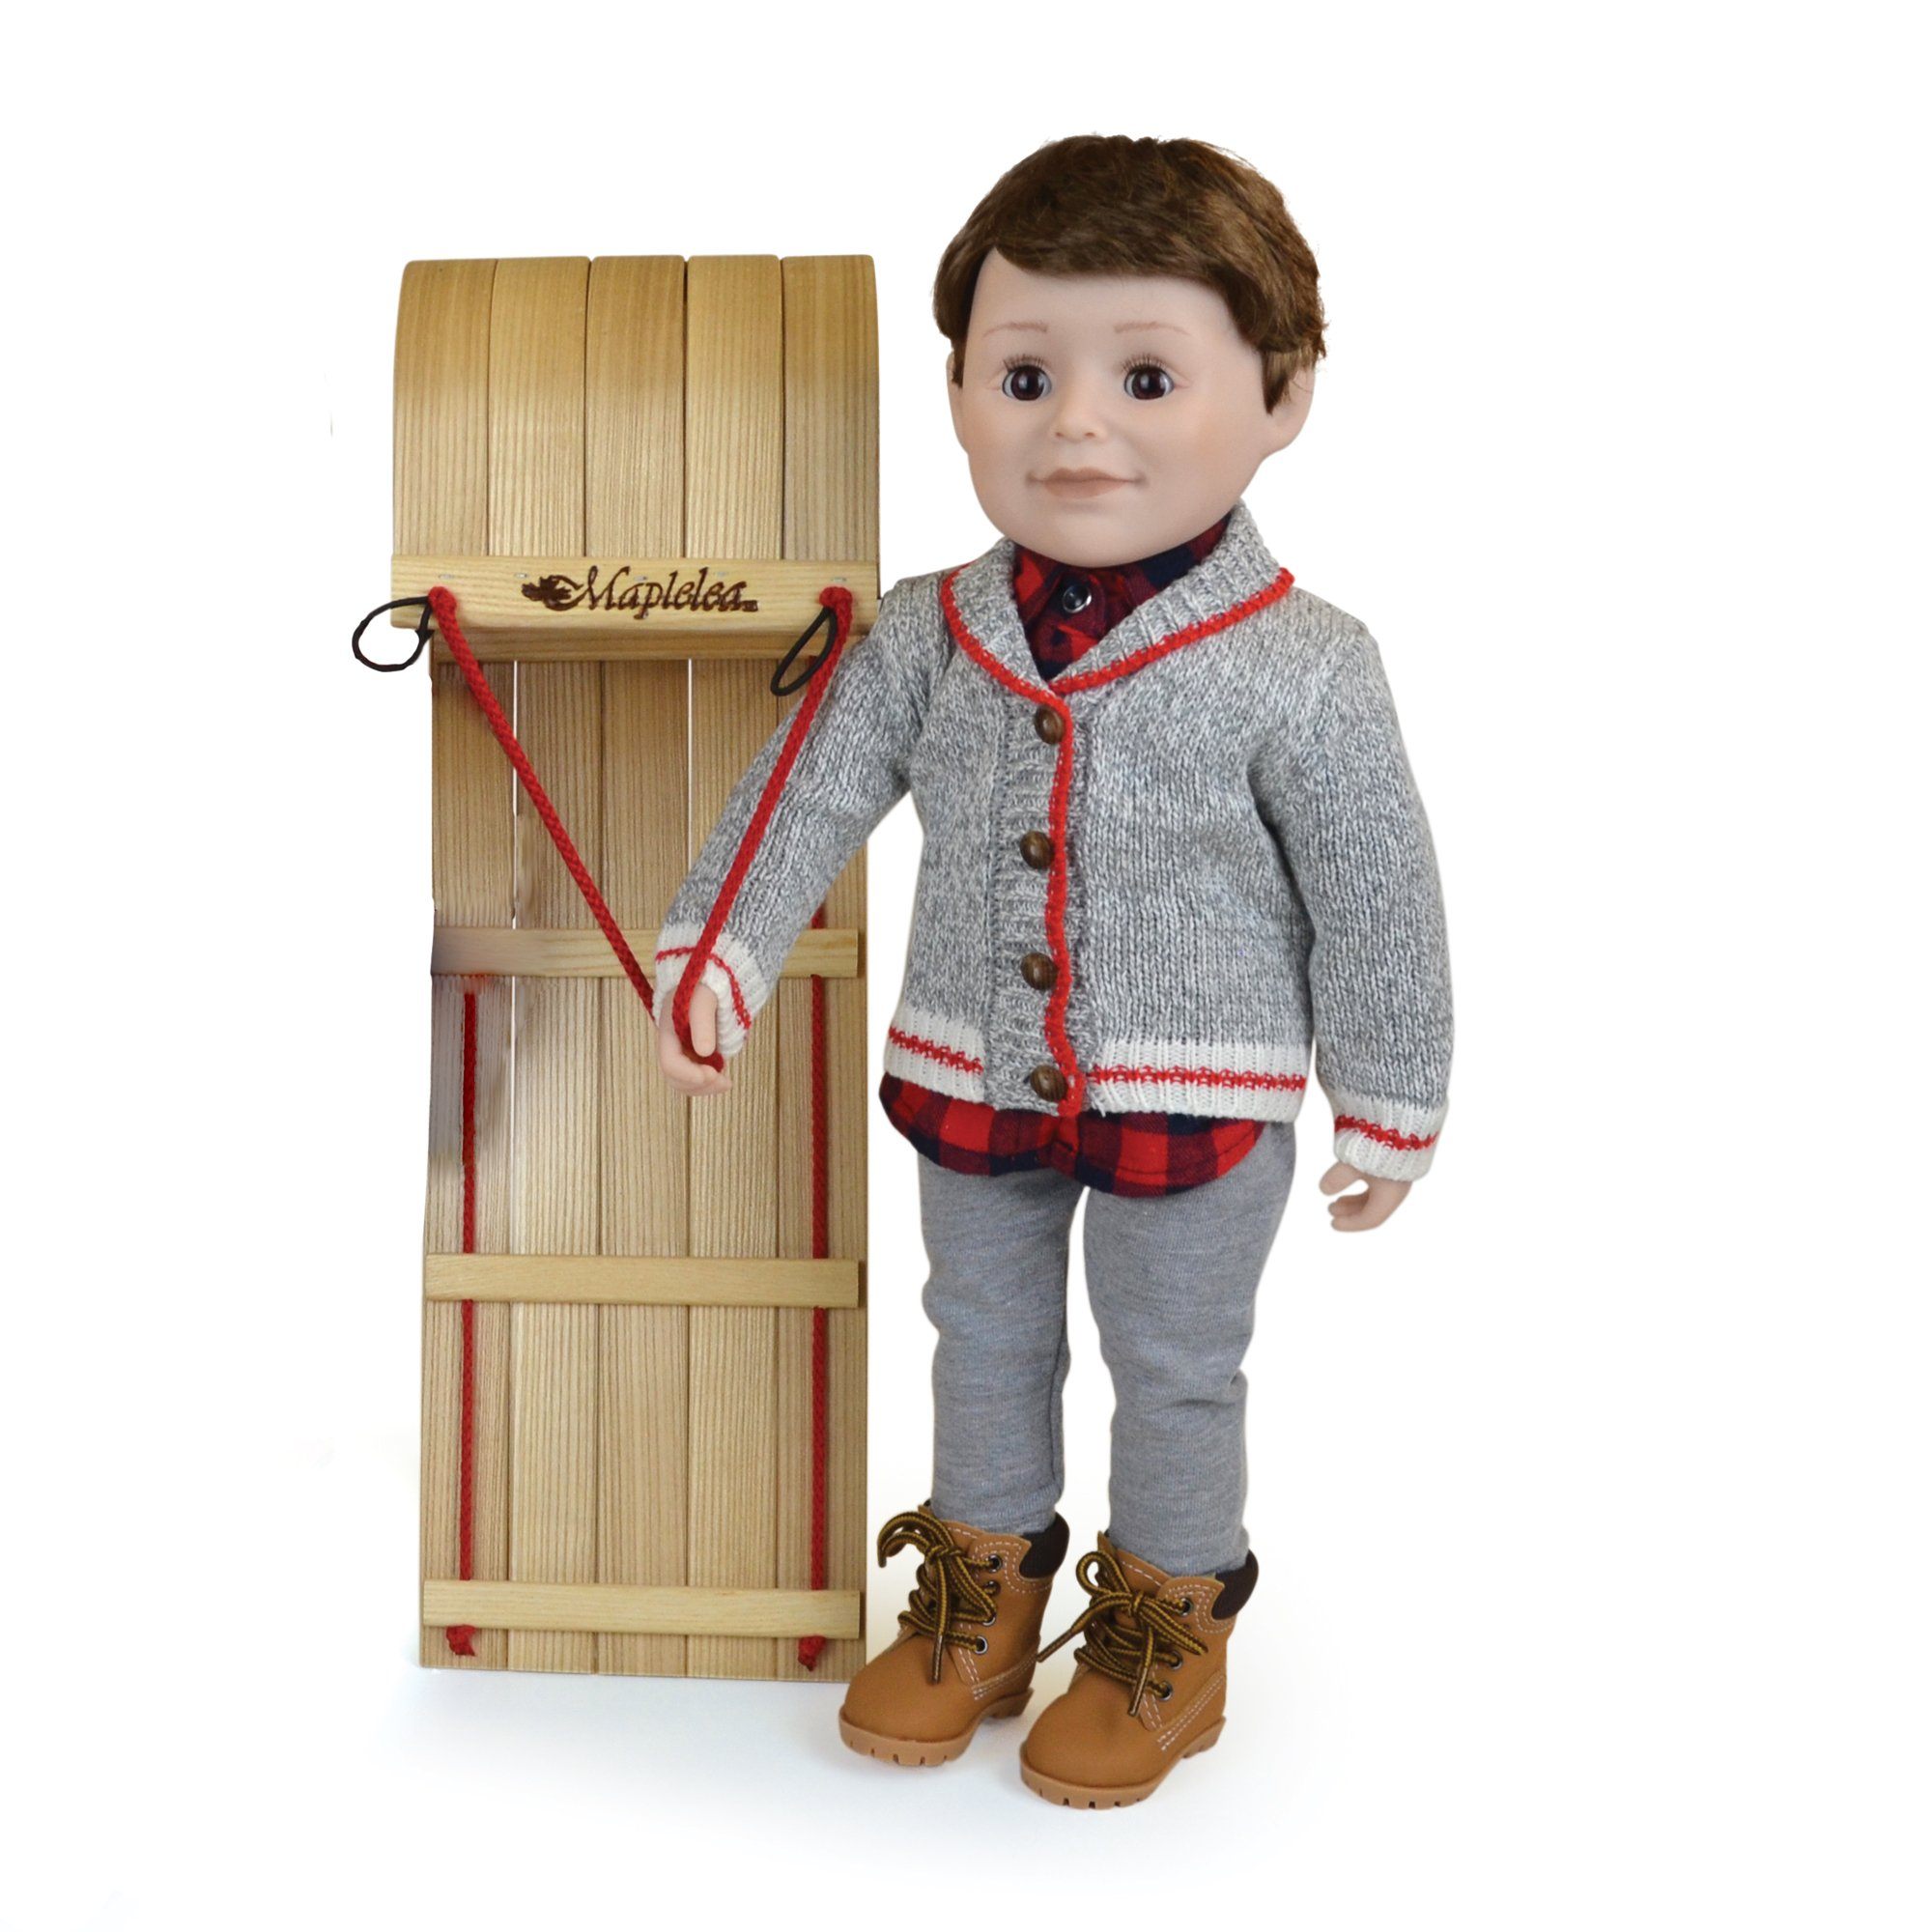 Beautiful Canadian style cardigan sweater in grey and red for 18 inch dolls